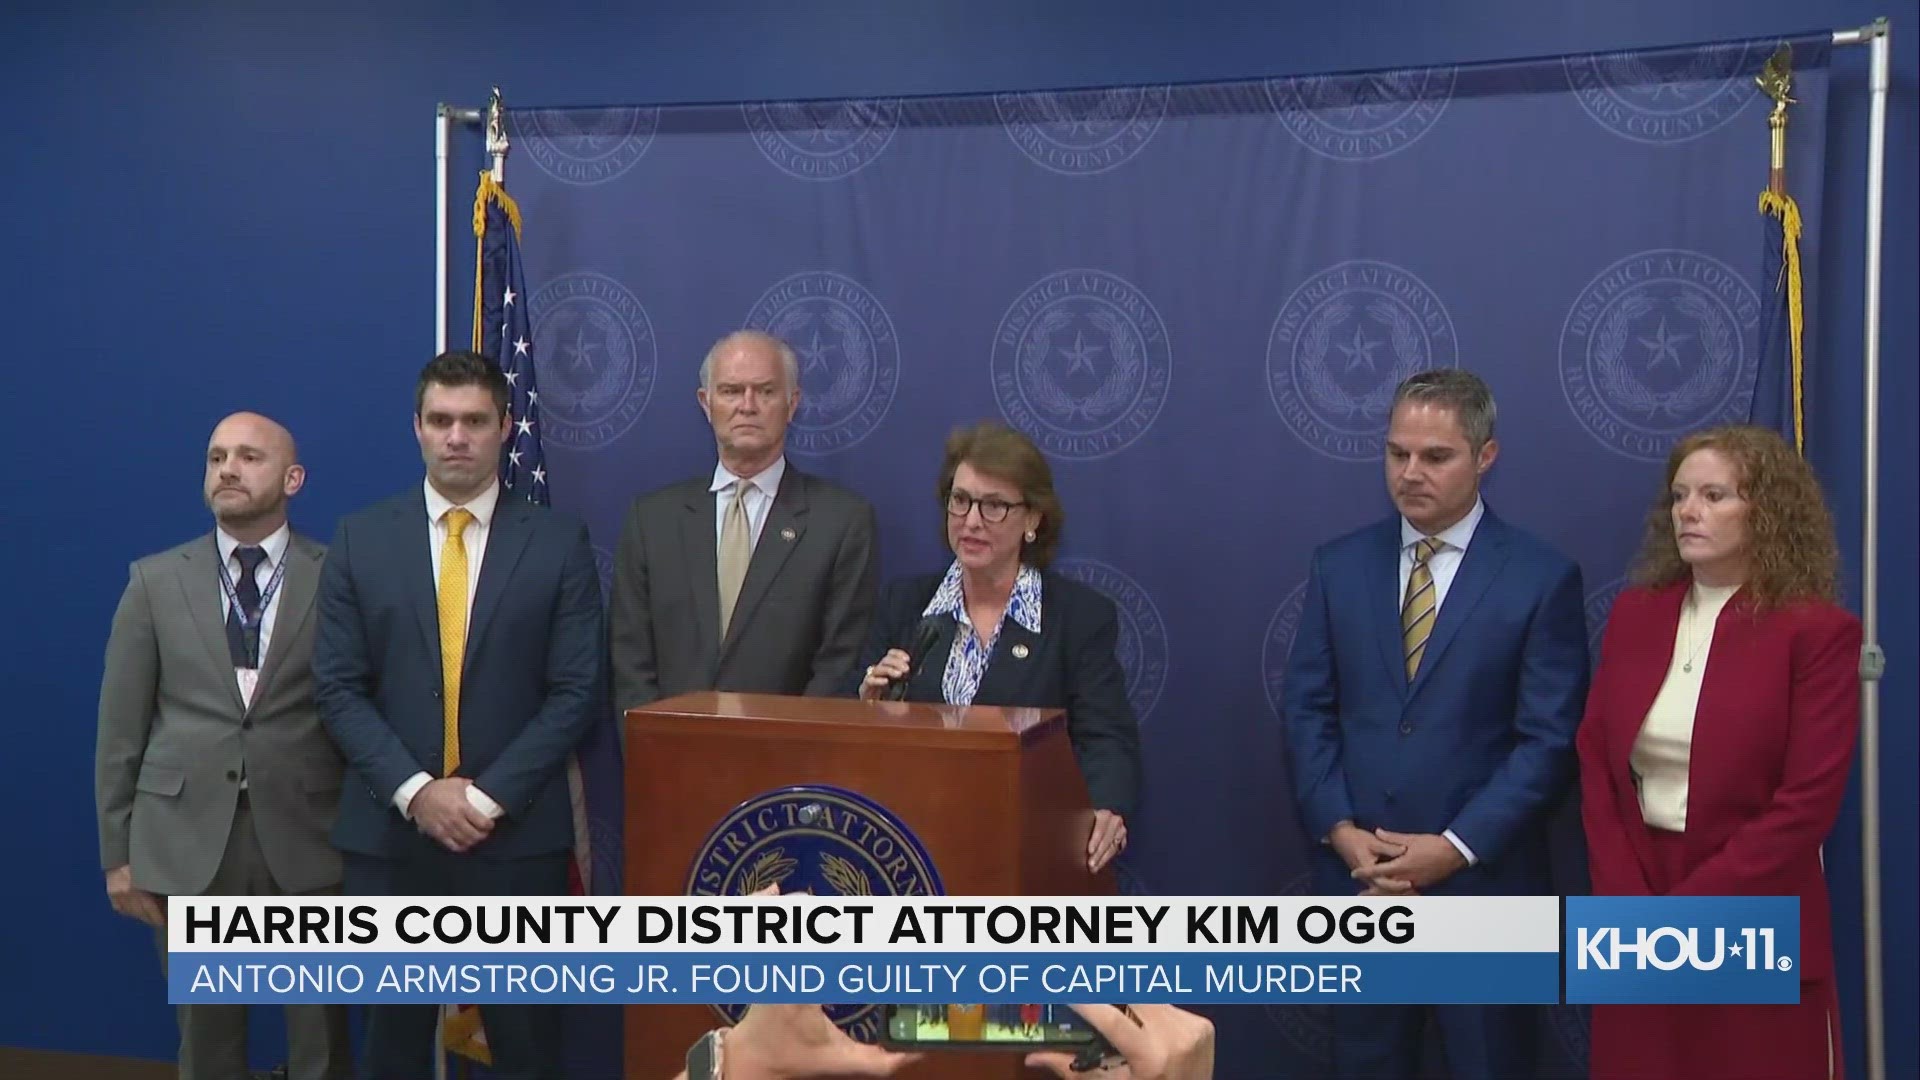 "In trying to speak for those who no longer had a voice to defend themselves or say what happened, our job was to find justice for them," DA Kim Ogg said.